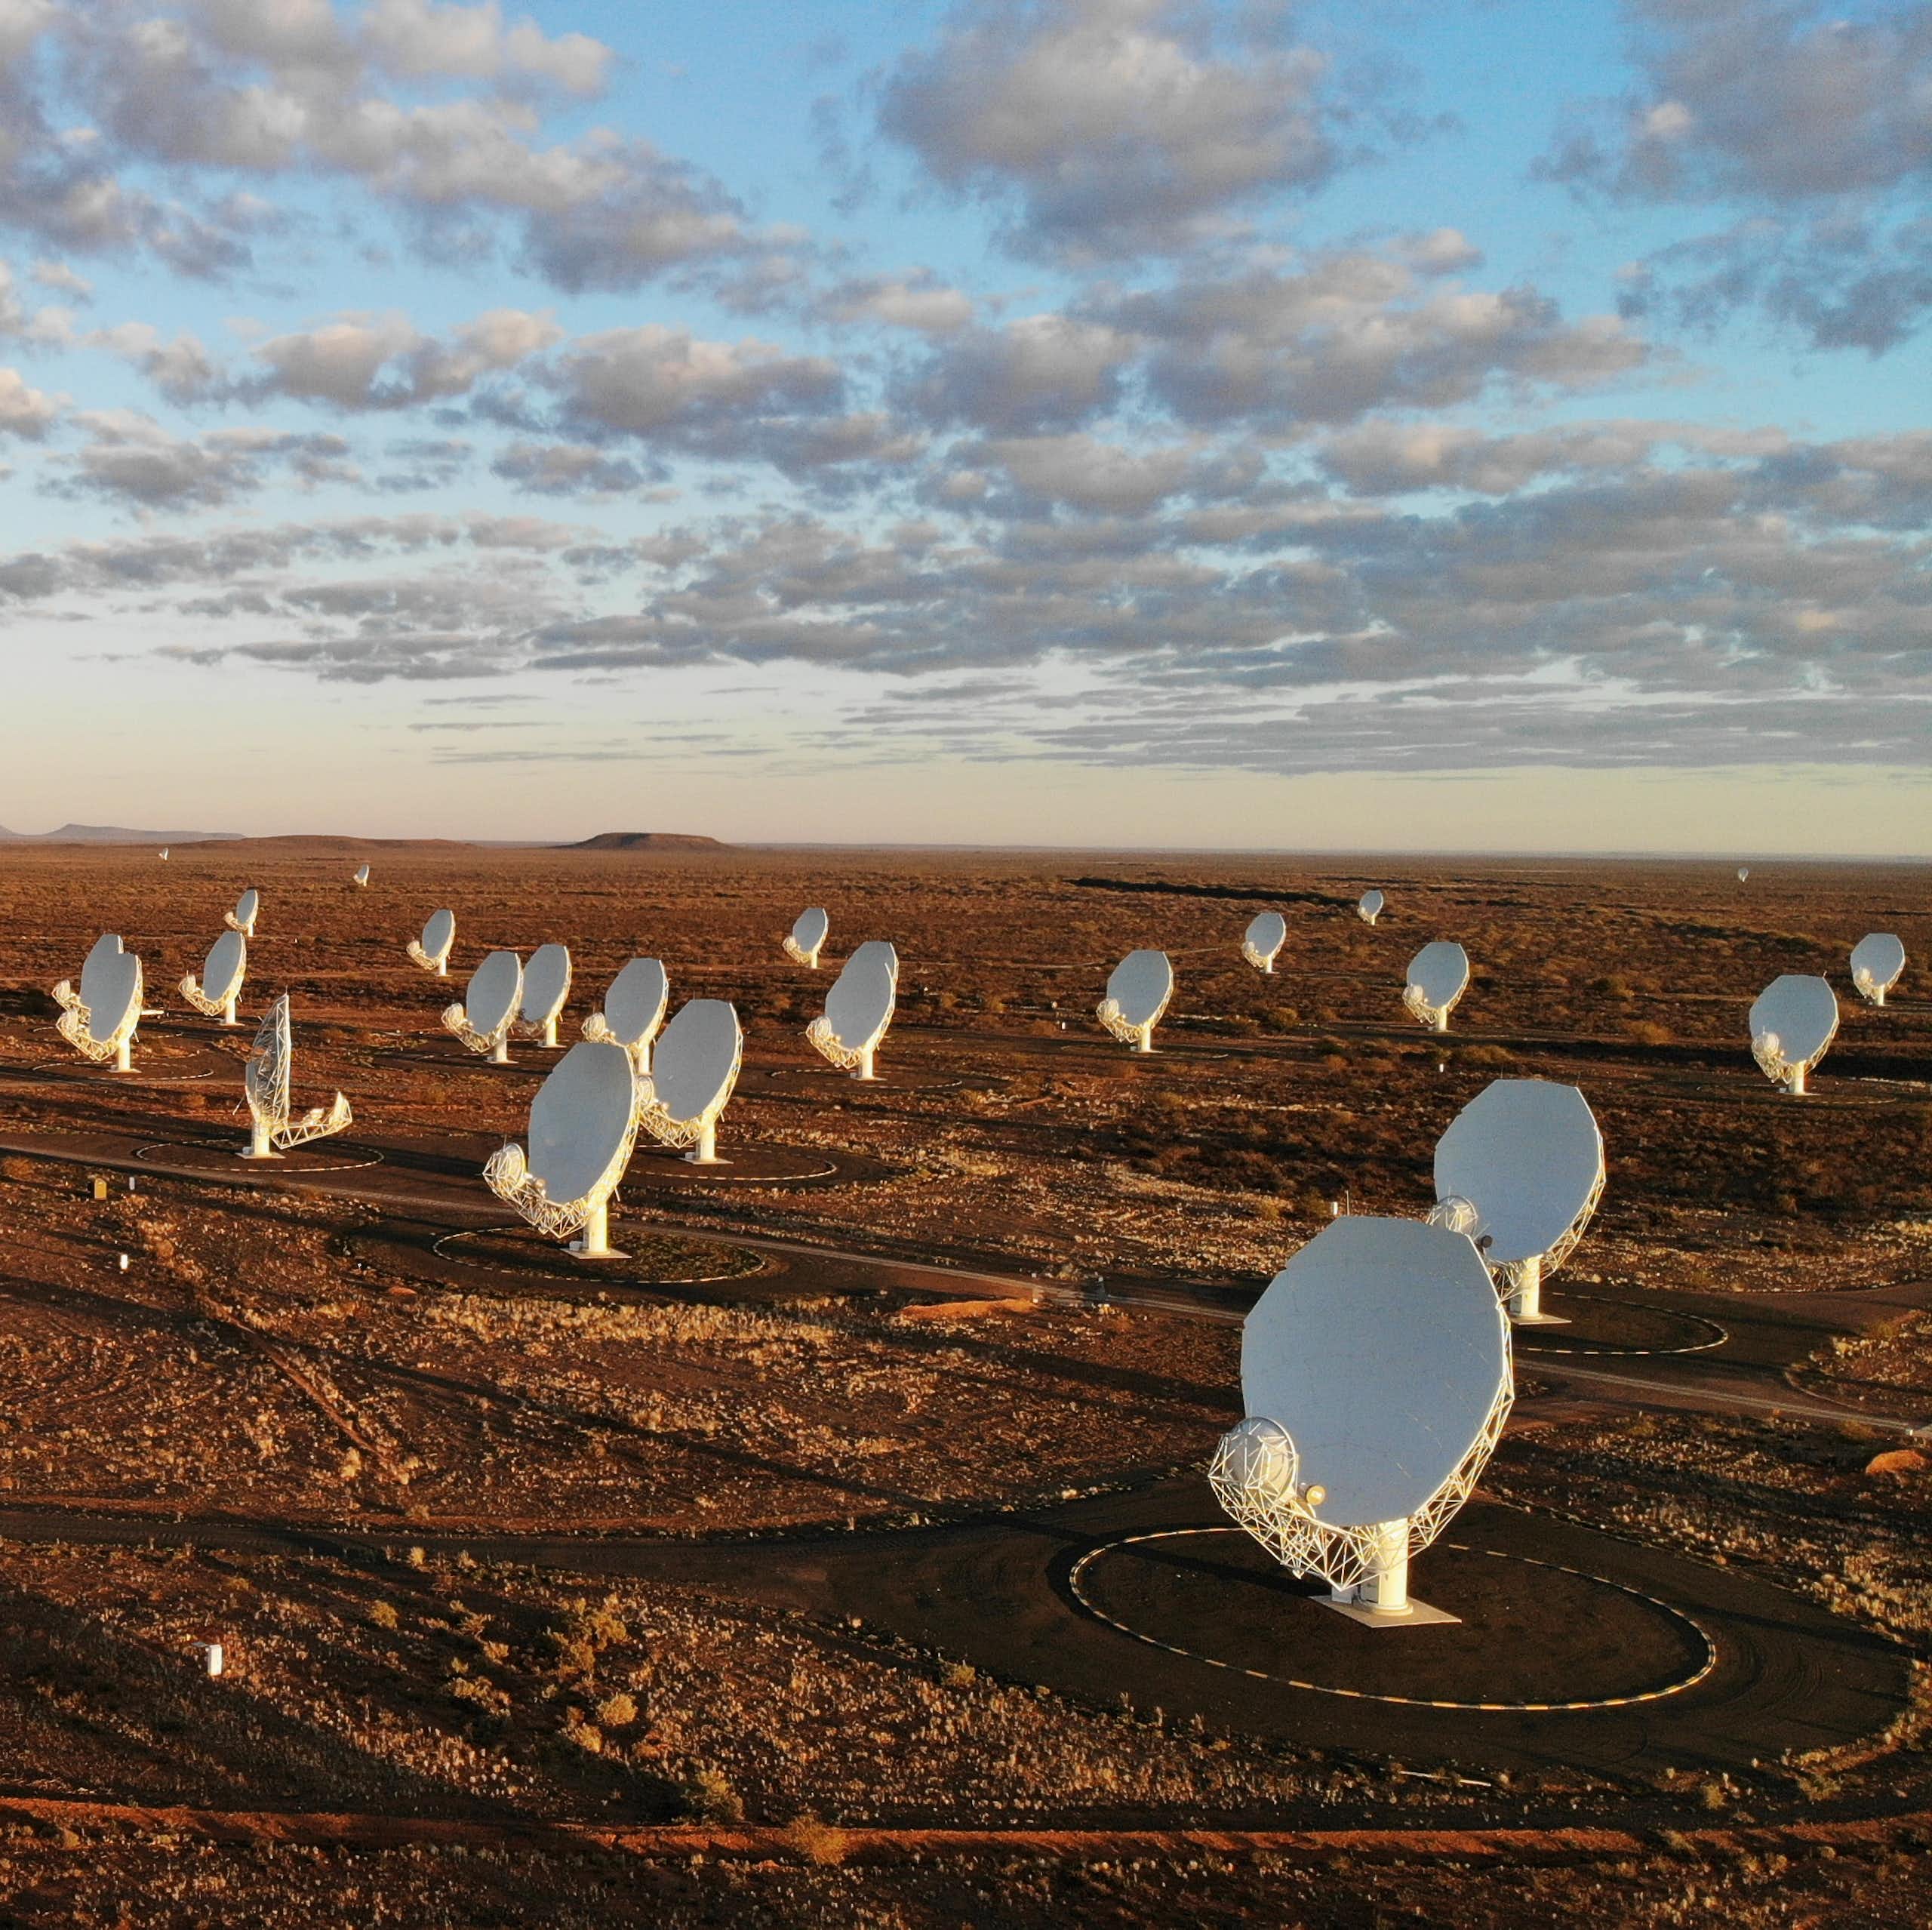 Large white satellite dishes, their receivers pointed up to the sky, are photographed in a sprawling, empty patch of land